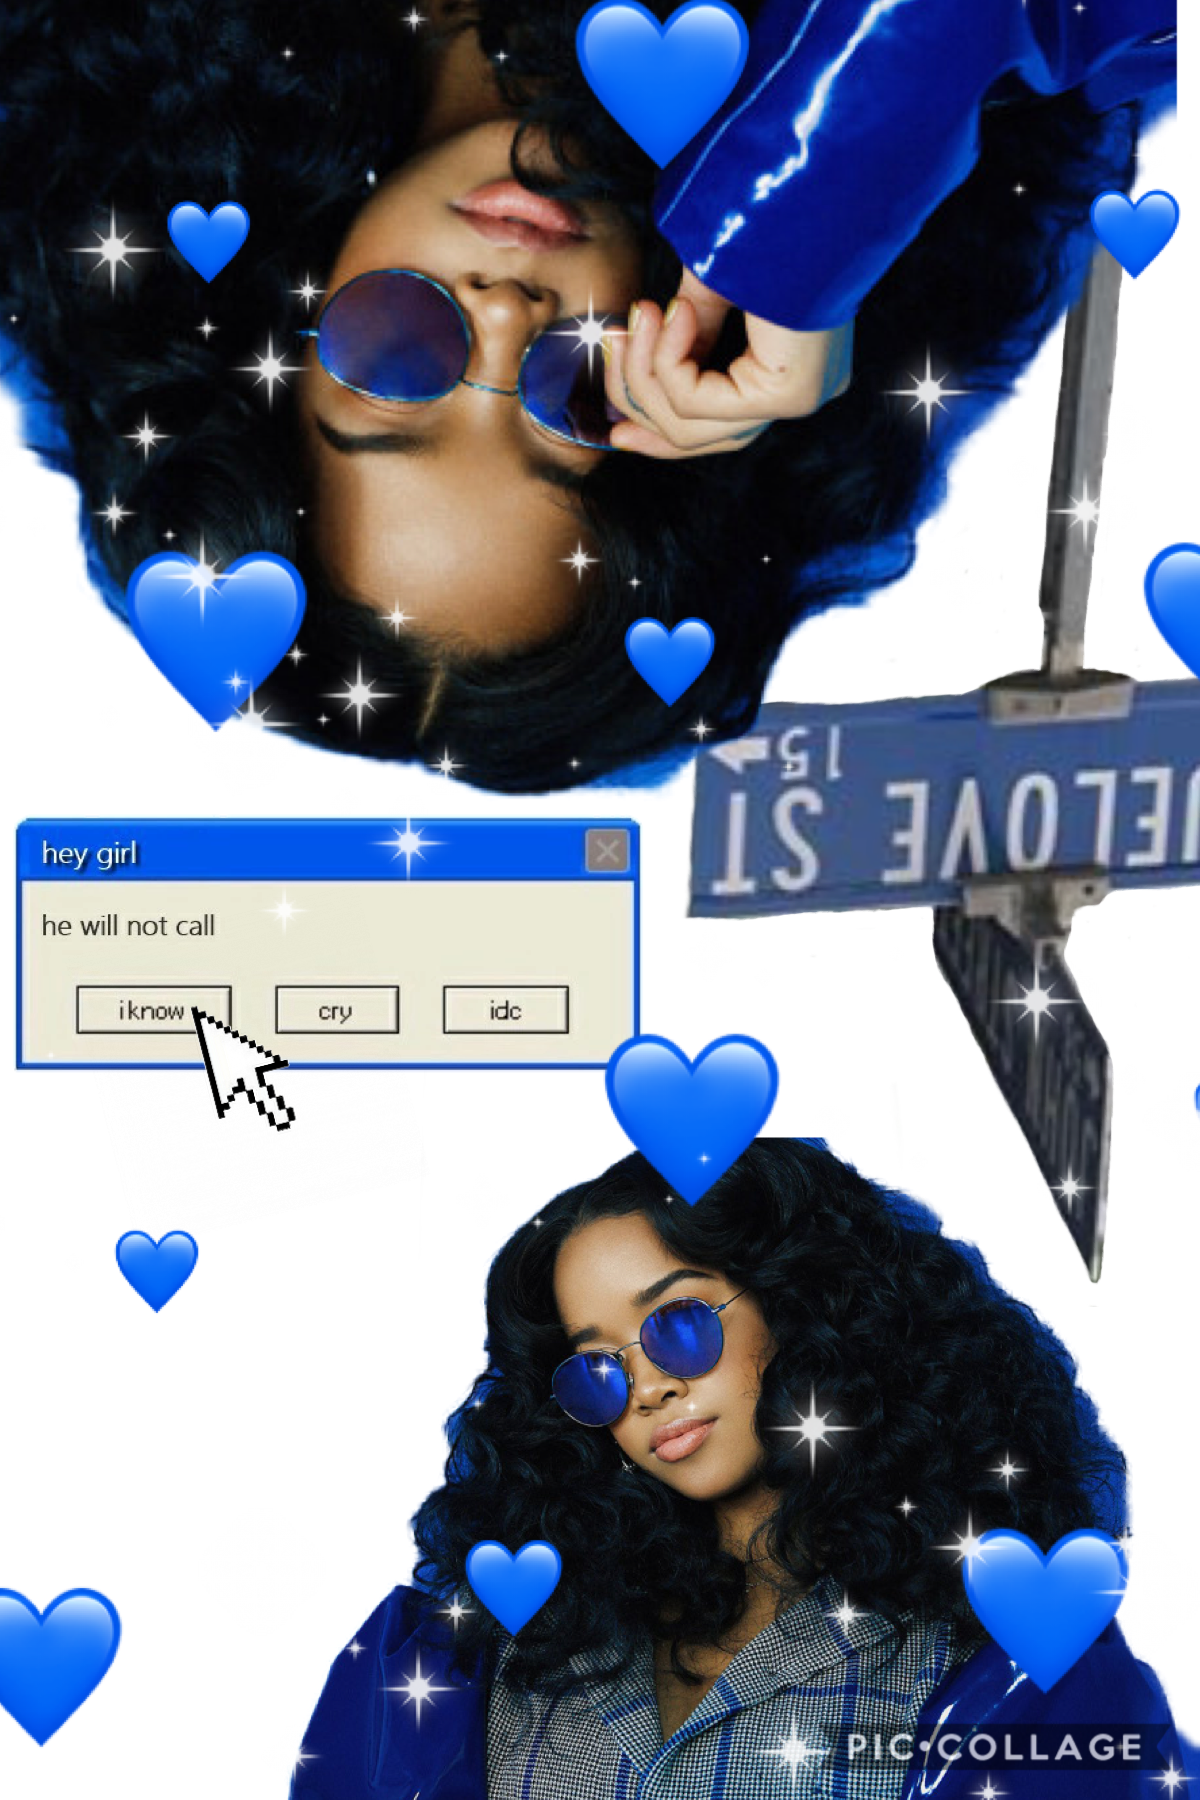 Feature: H.E.R

Would you focus on me?